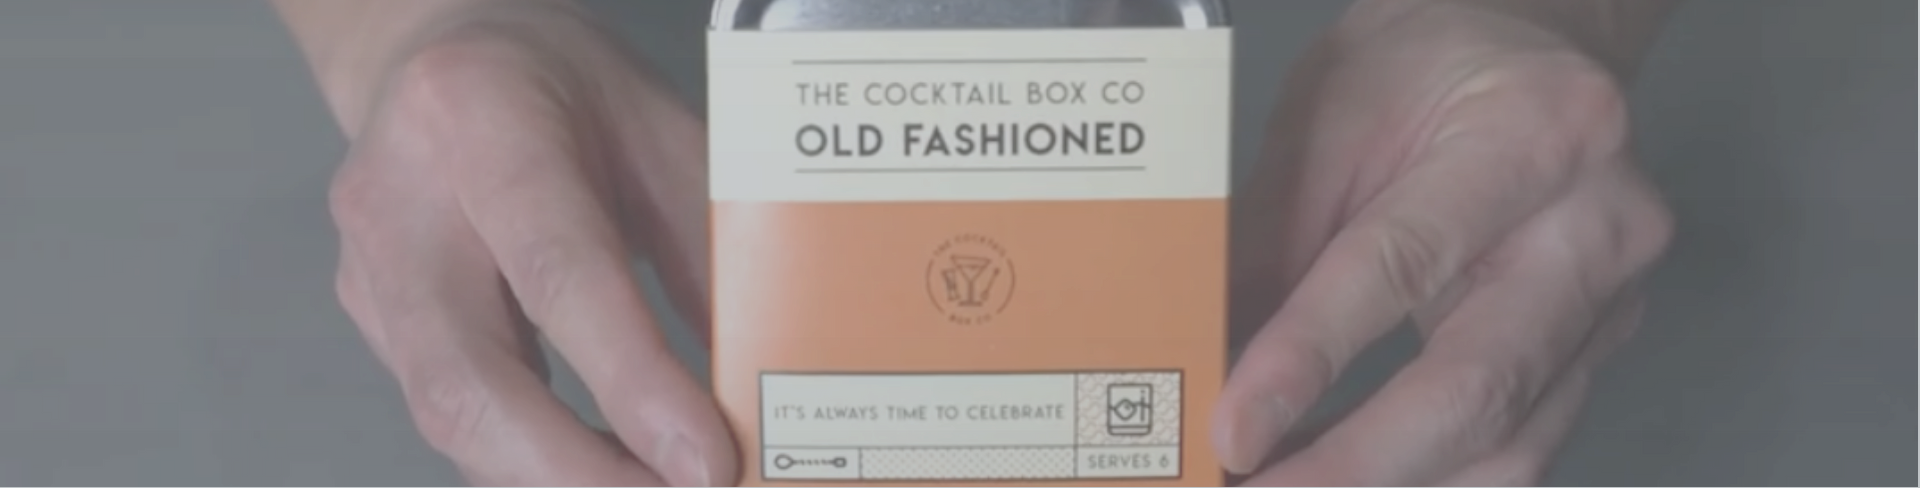 Load video: Learn how to make an Old Fashioned with The Cocktail Box Co.  Simple, fun and fast!  Share with your friends, family and colleagues.